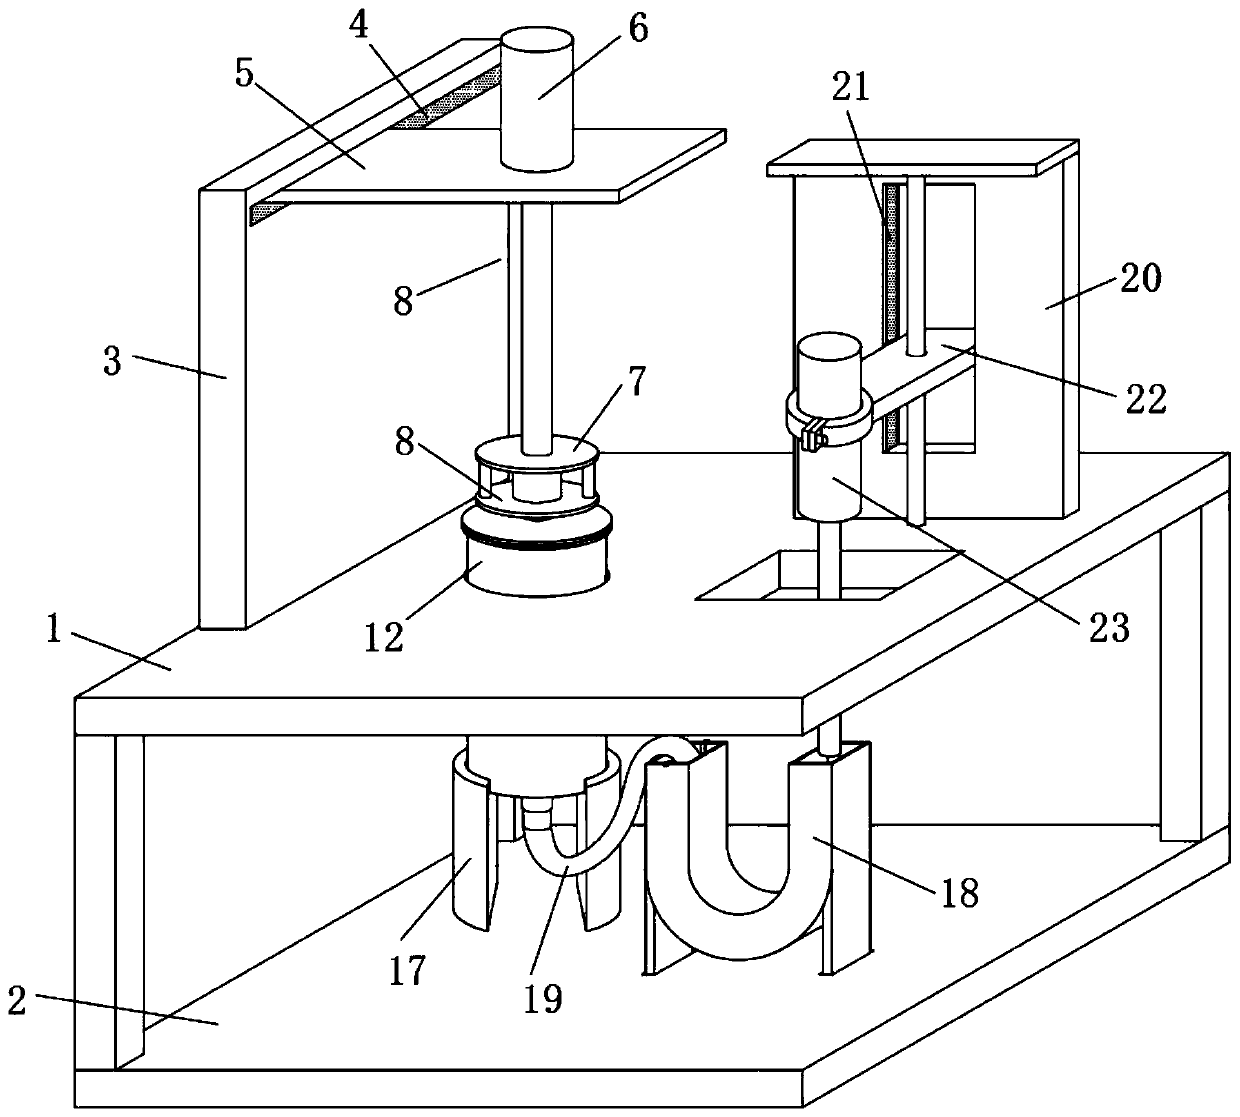 Device for detecting salt content in pickled food